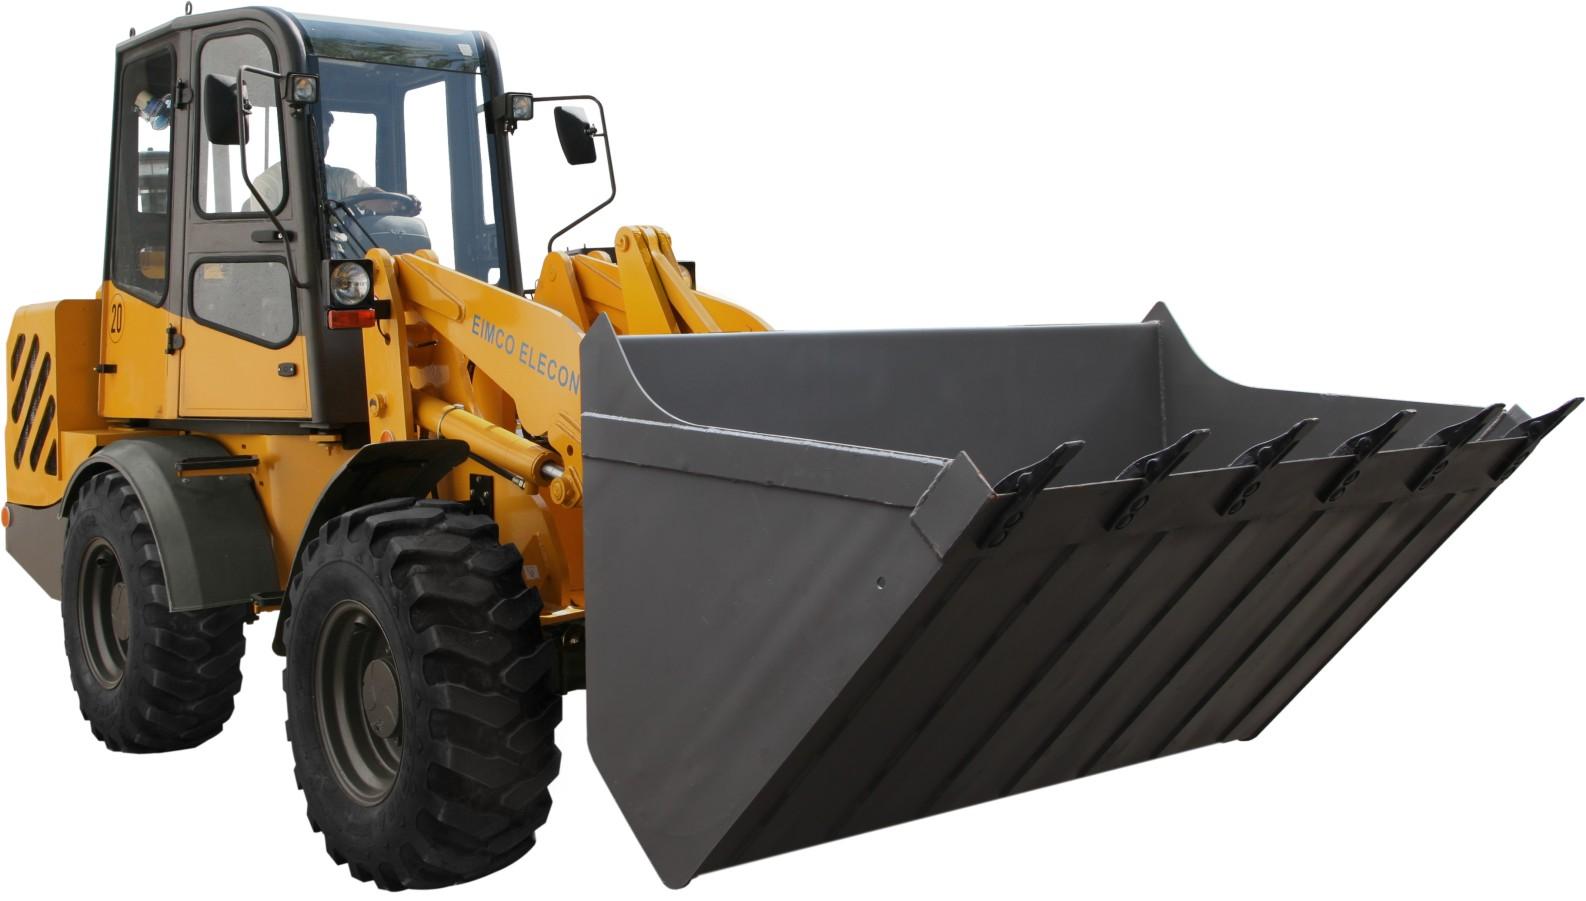 Going Hi-tech Eimco Elecons new and unique articulated wheel loader, AL-120 expected to fill up a void in the material handling equipment industries.